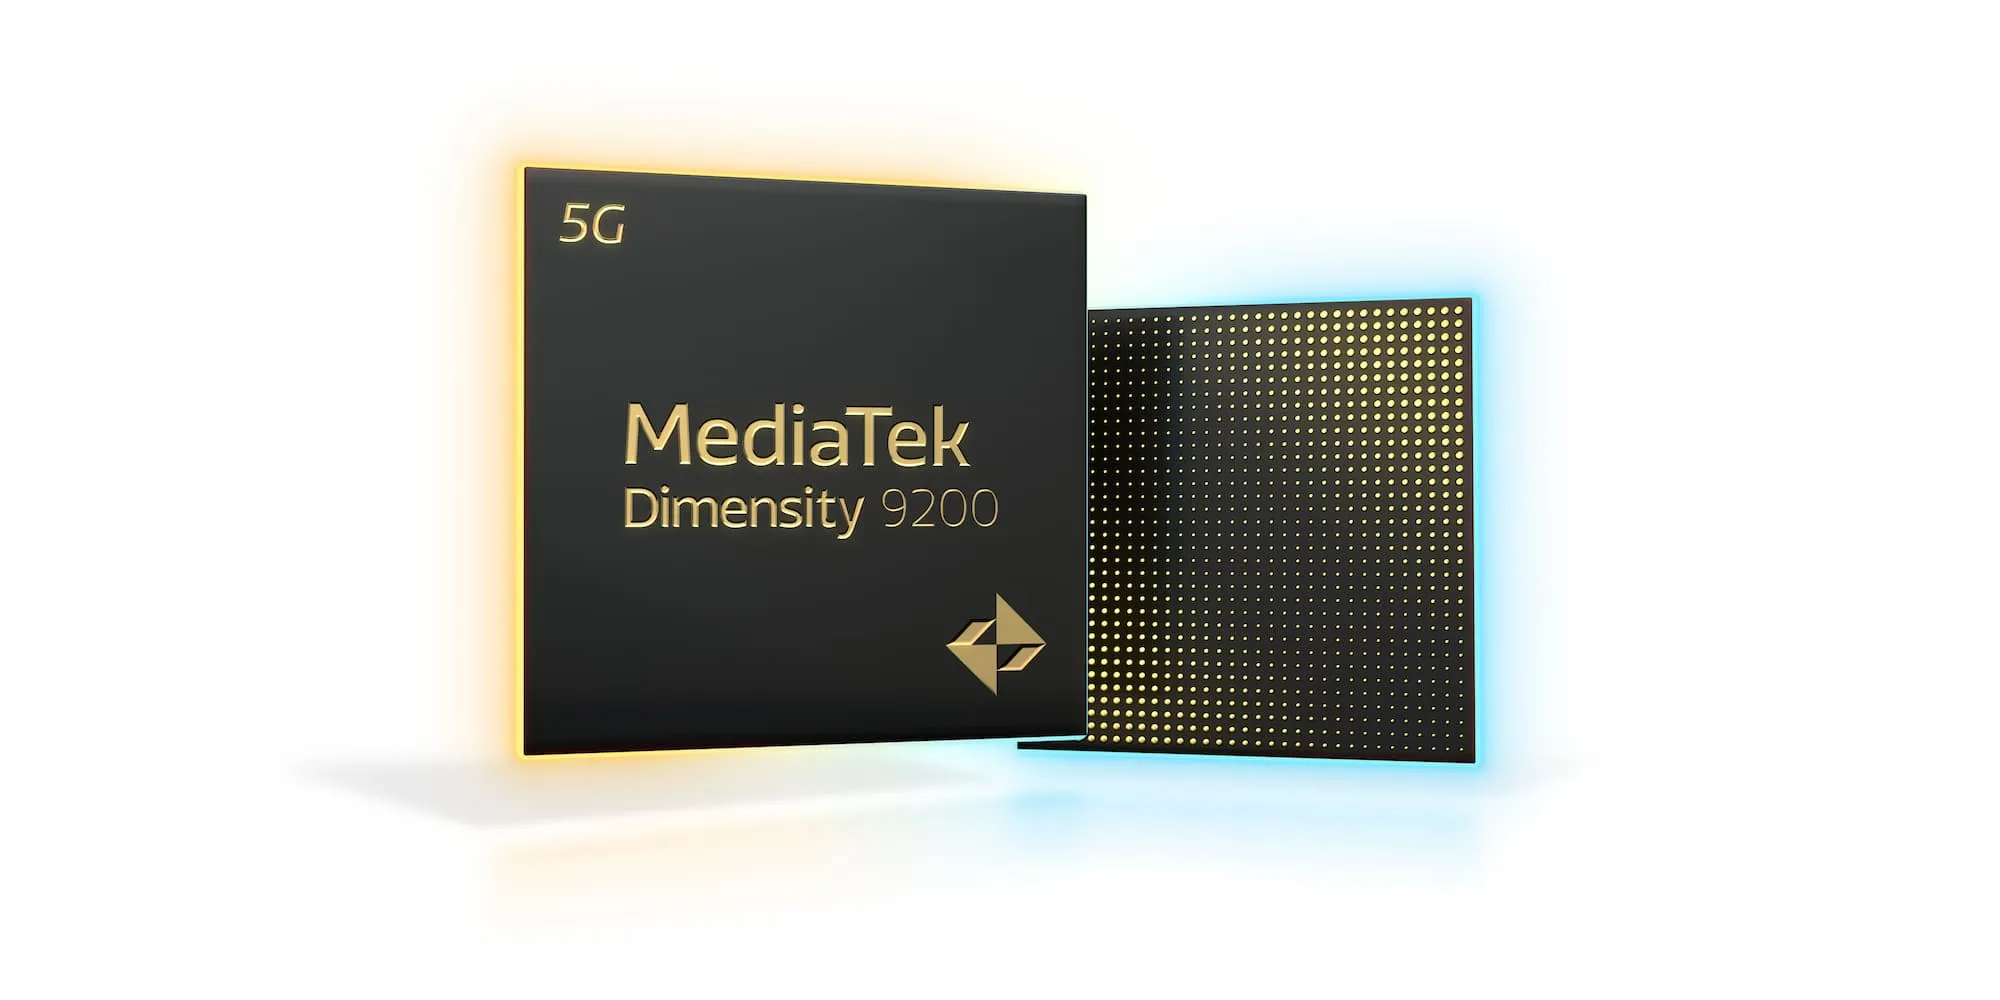 ❤ MediaTek is also bringing satellite connectivity to Android phones